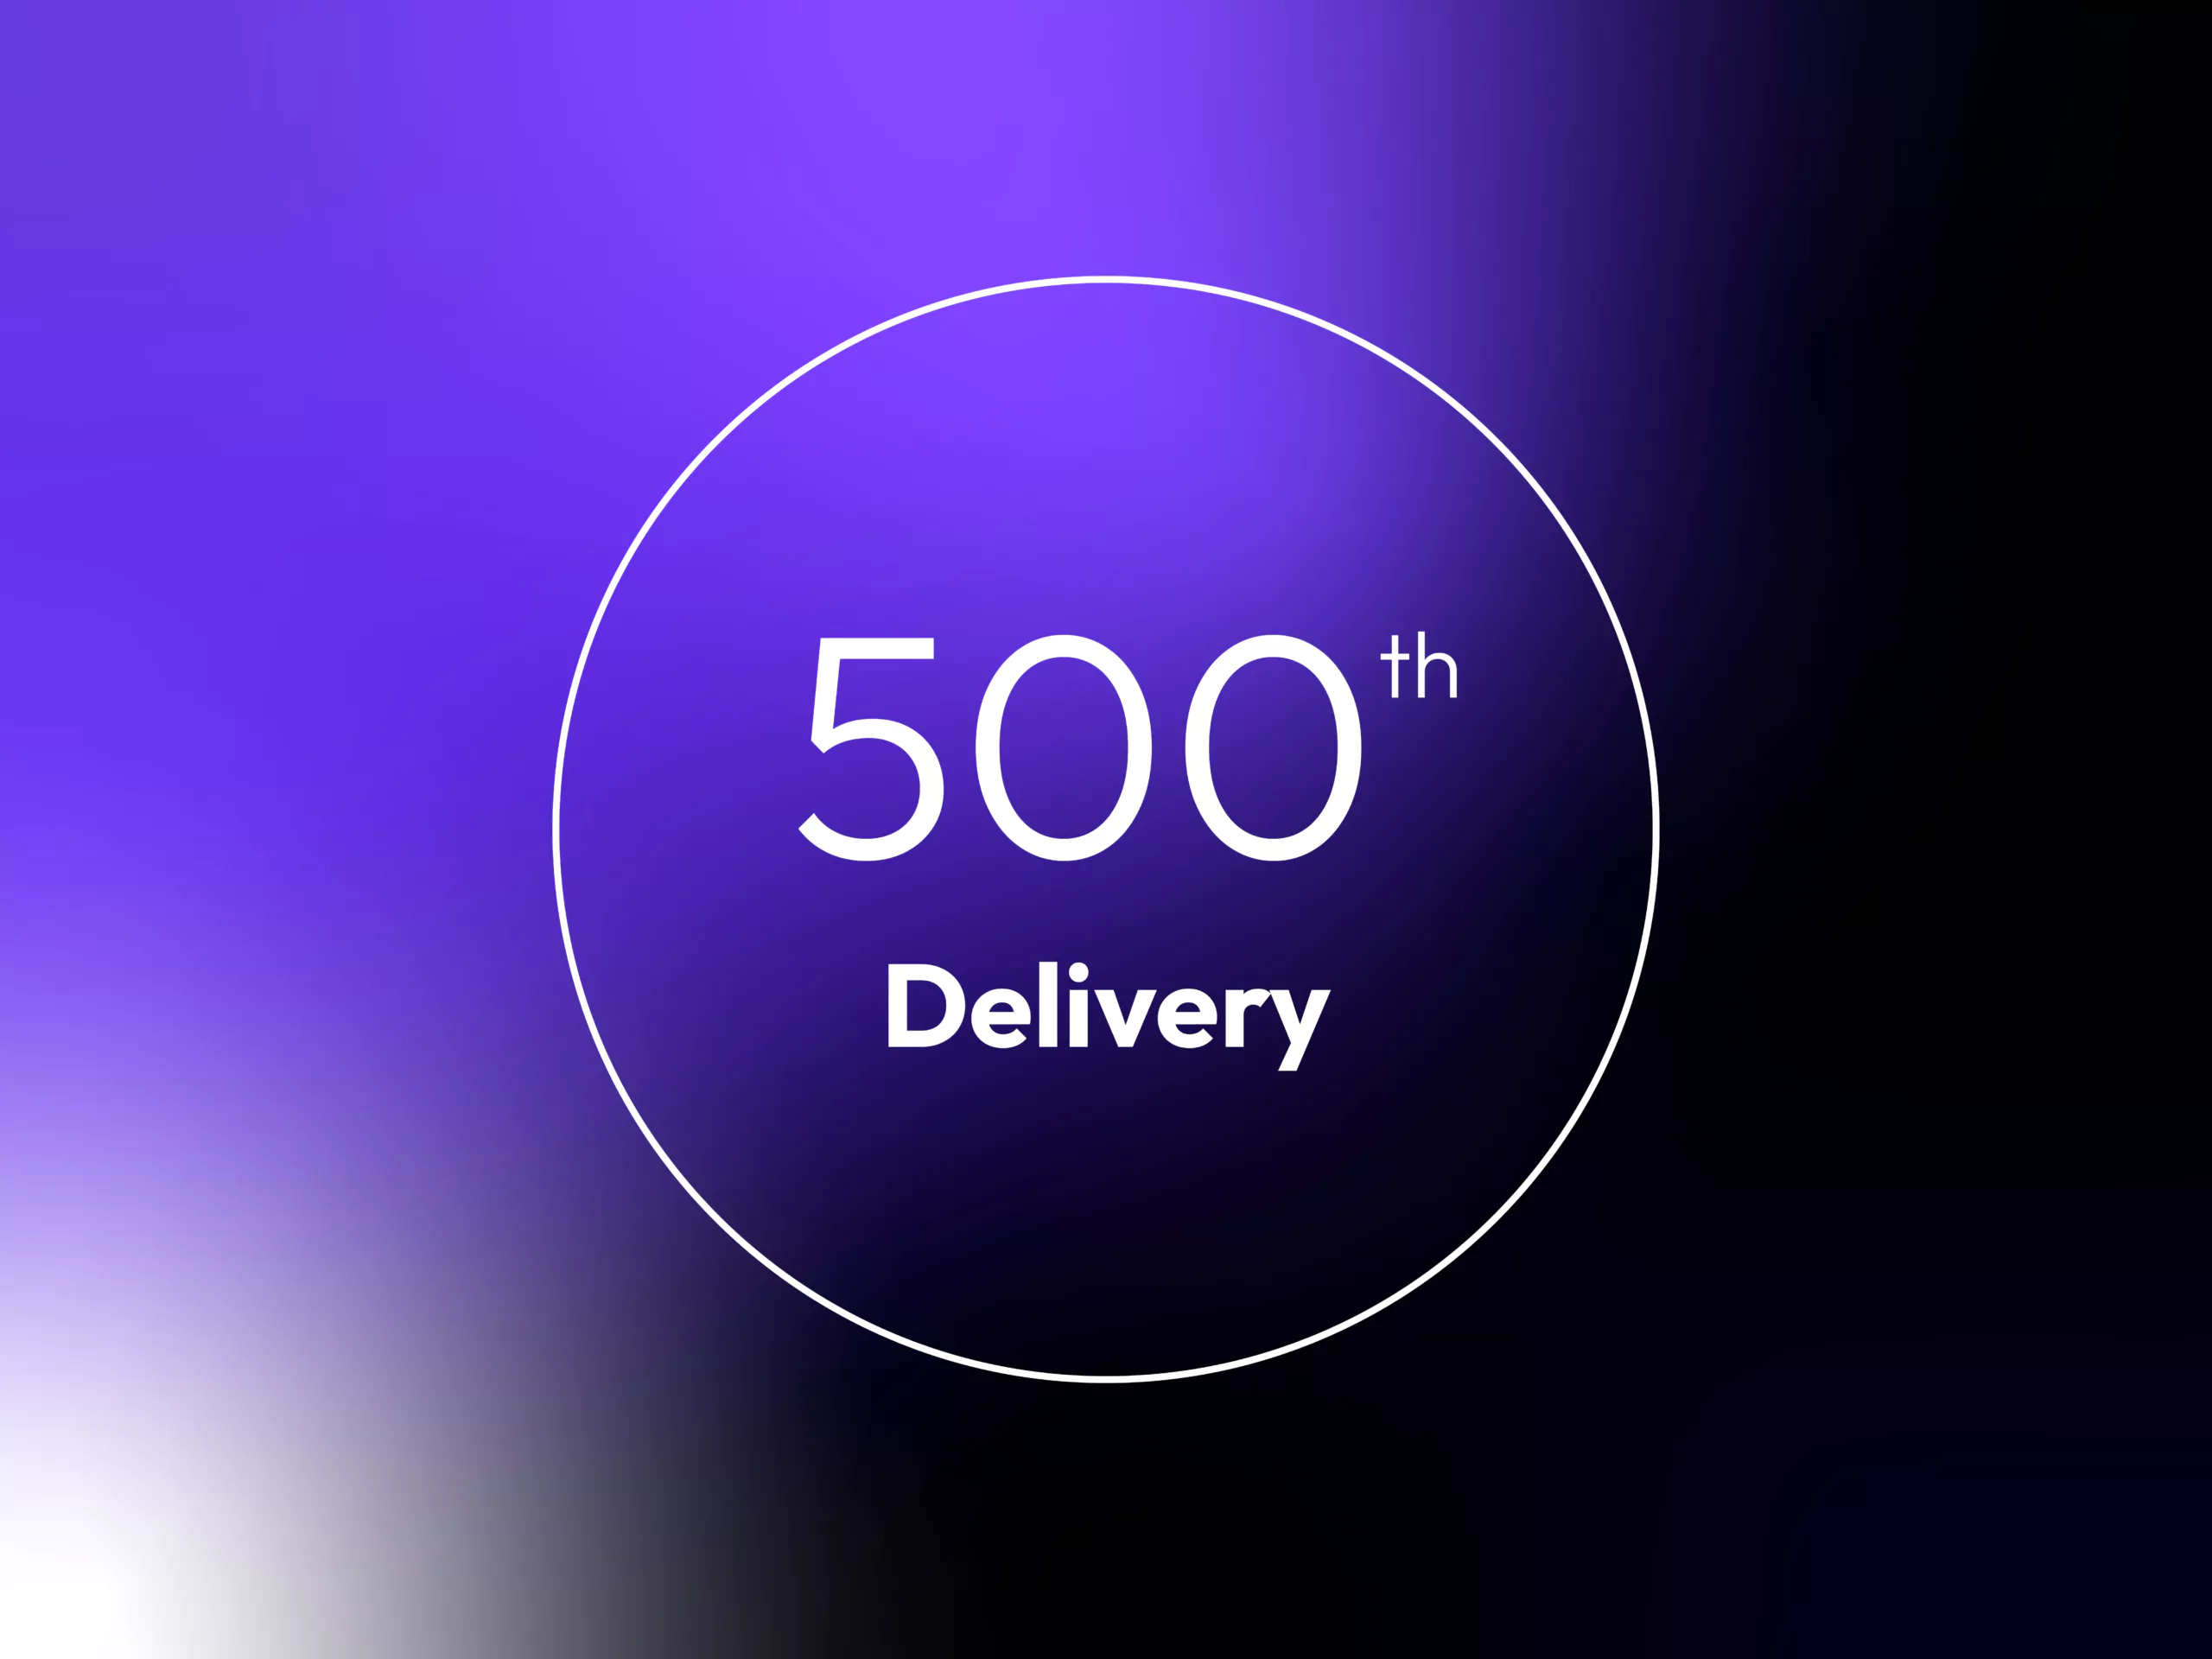 Anywaves 500th Delivery scaled